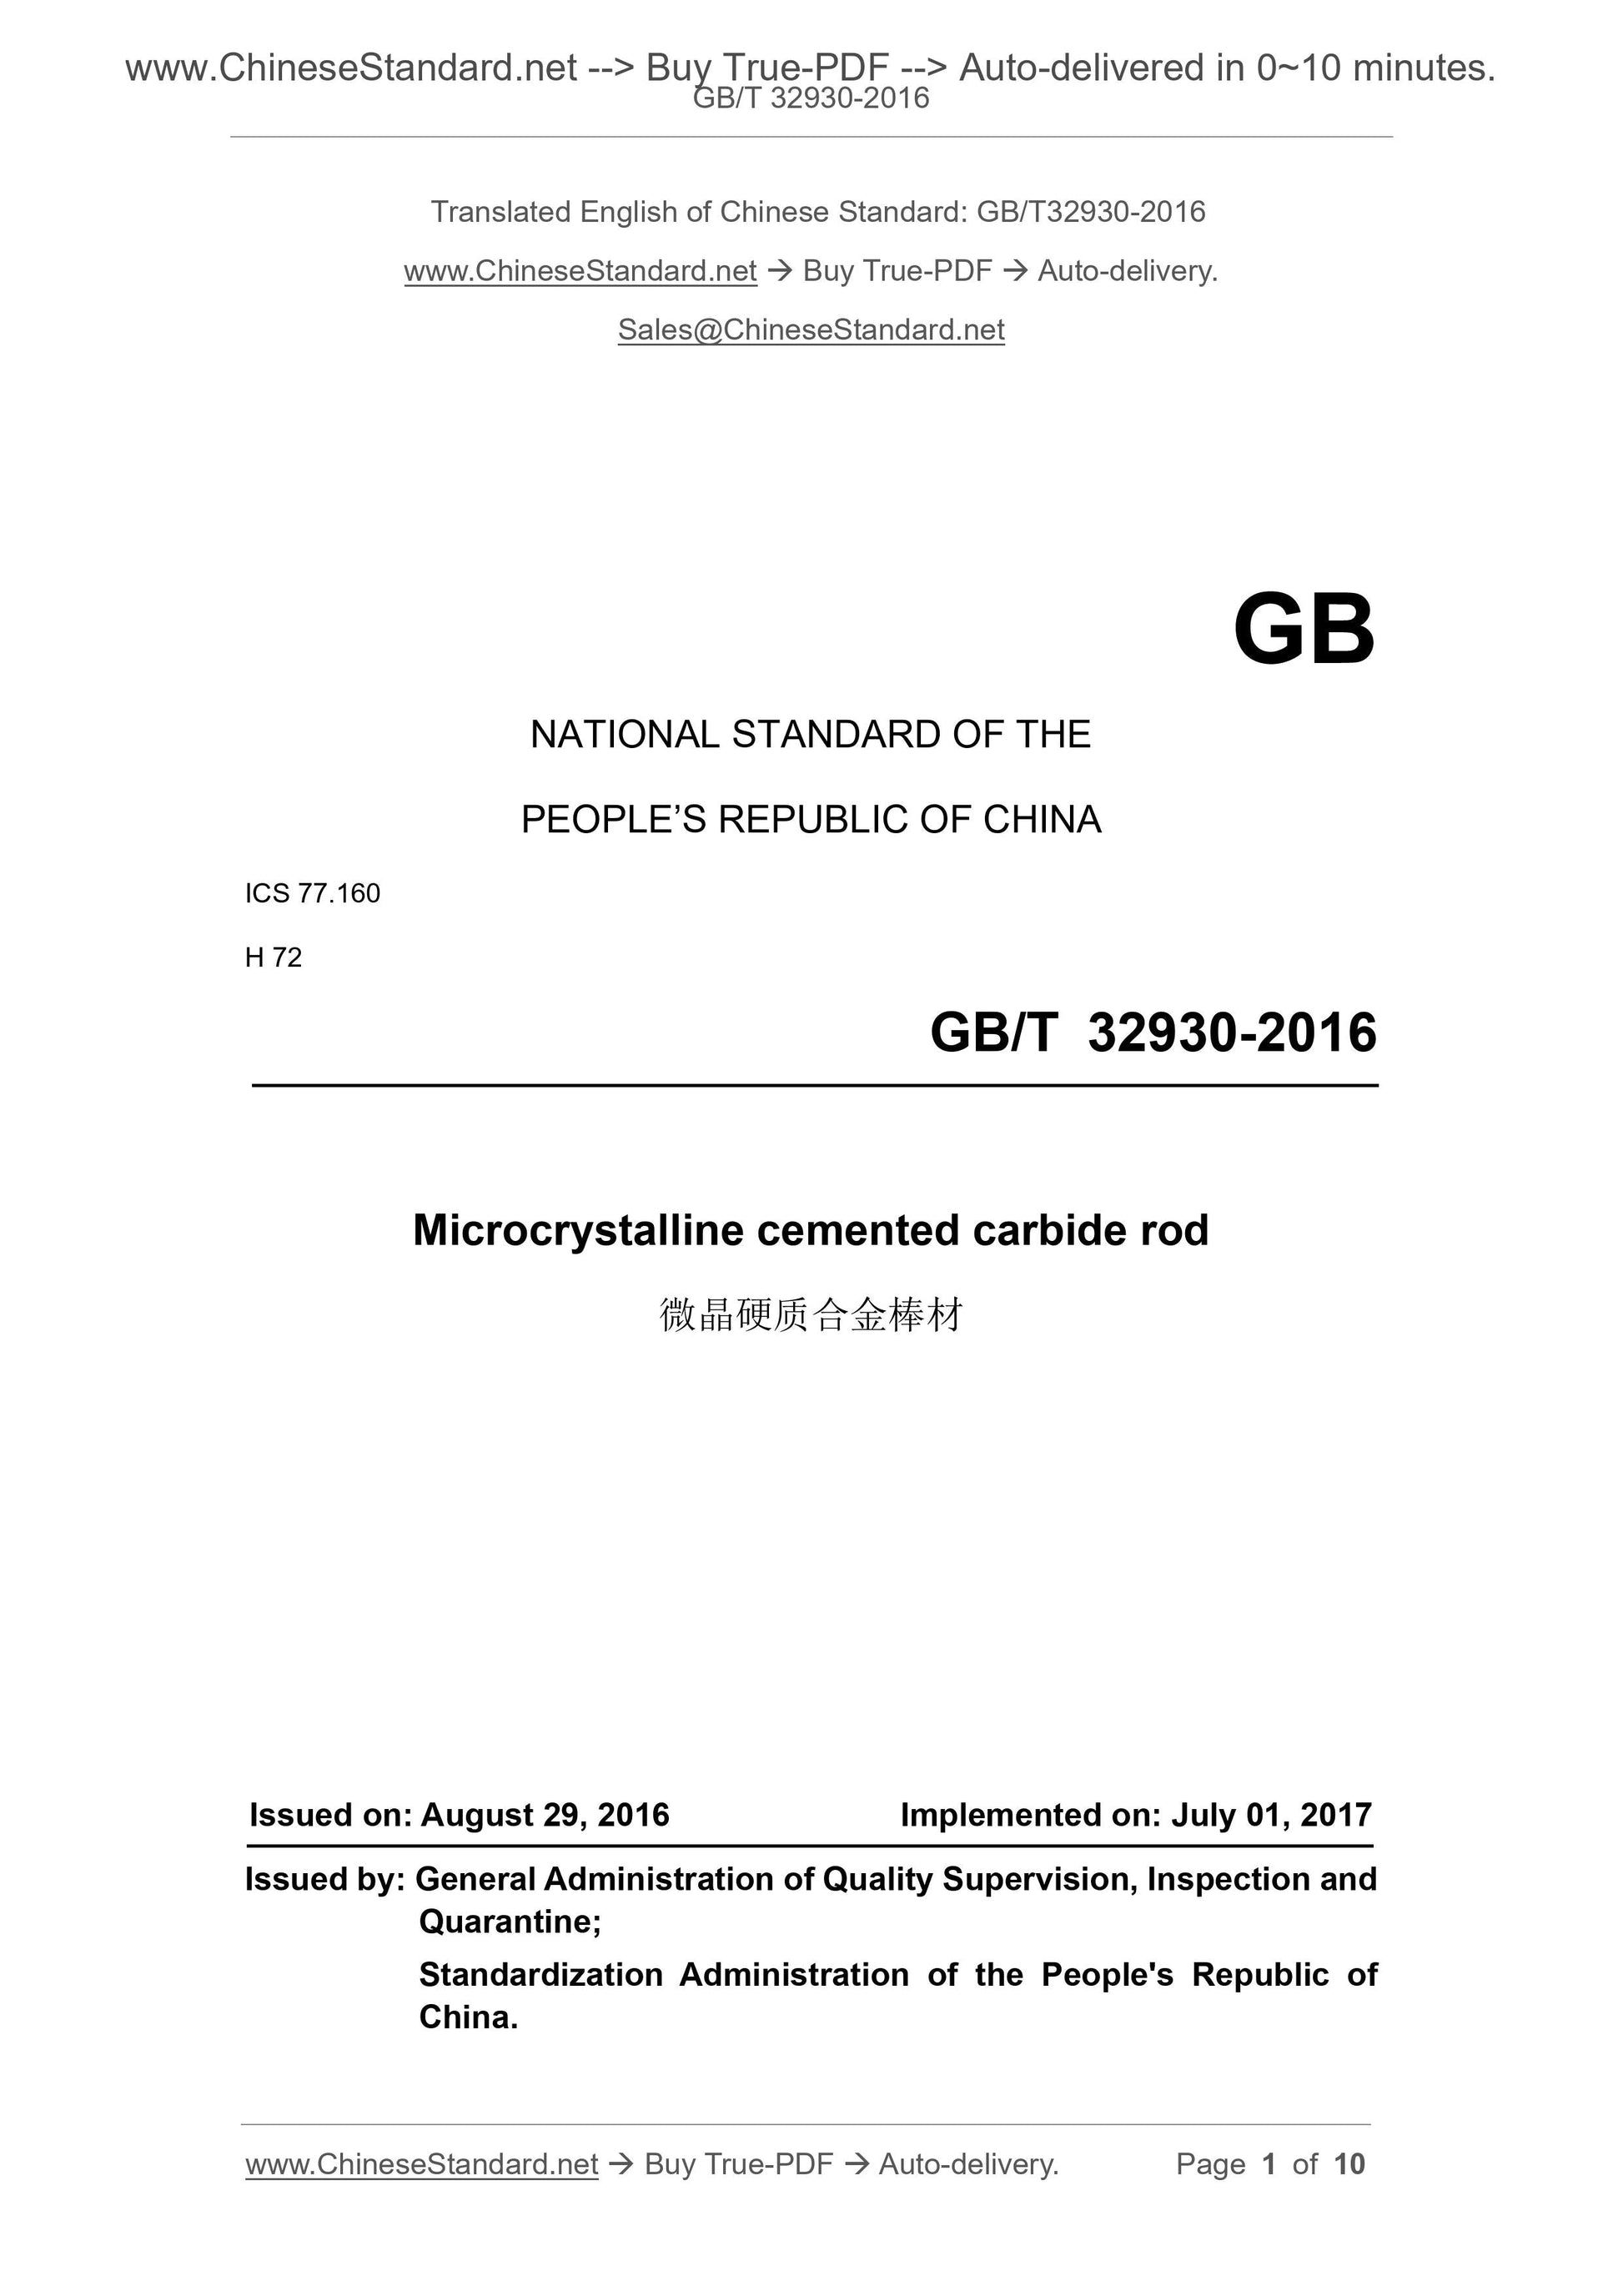 GB/T 32930-2016 Page 1